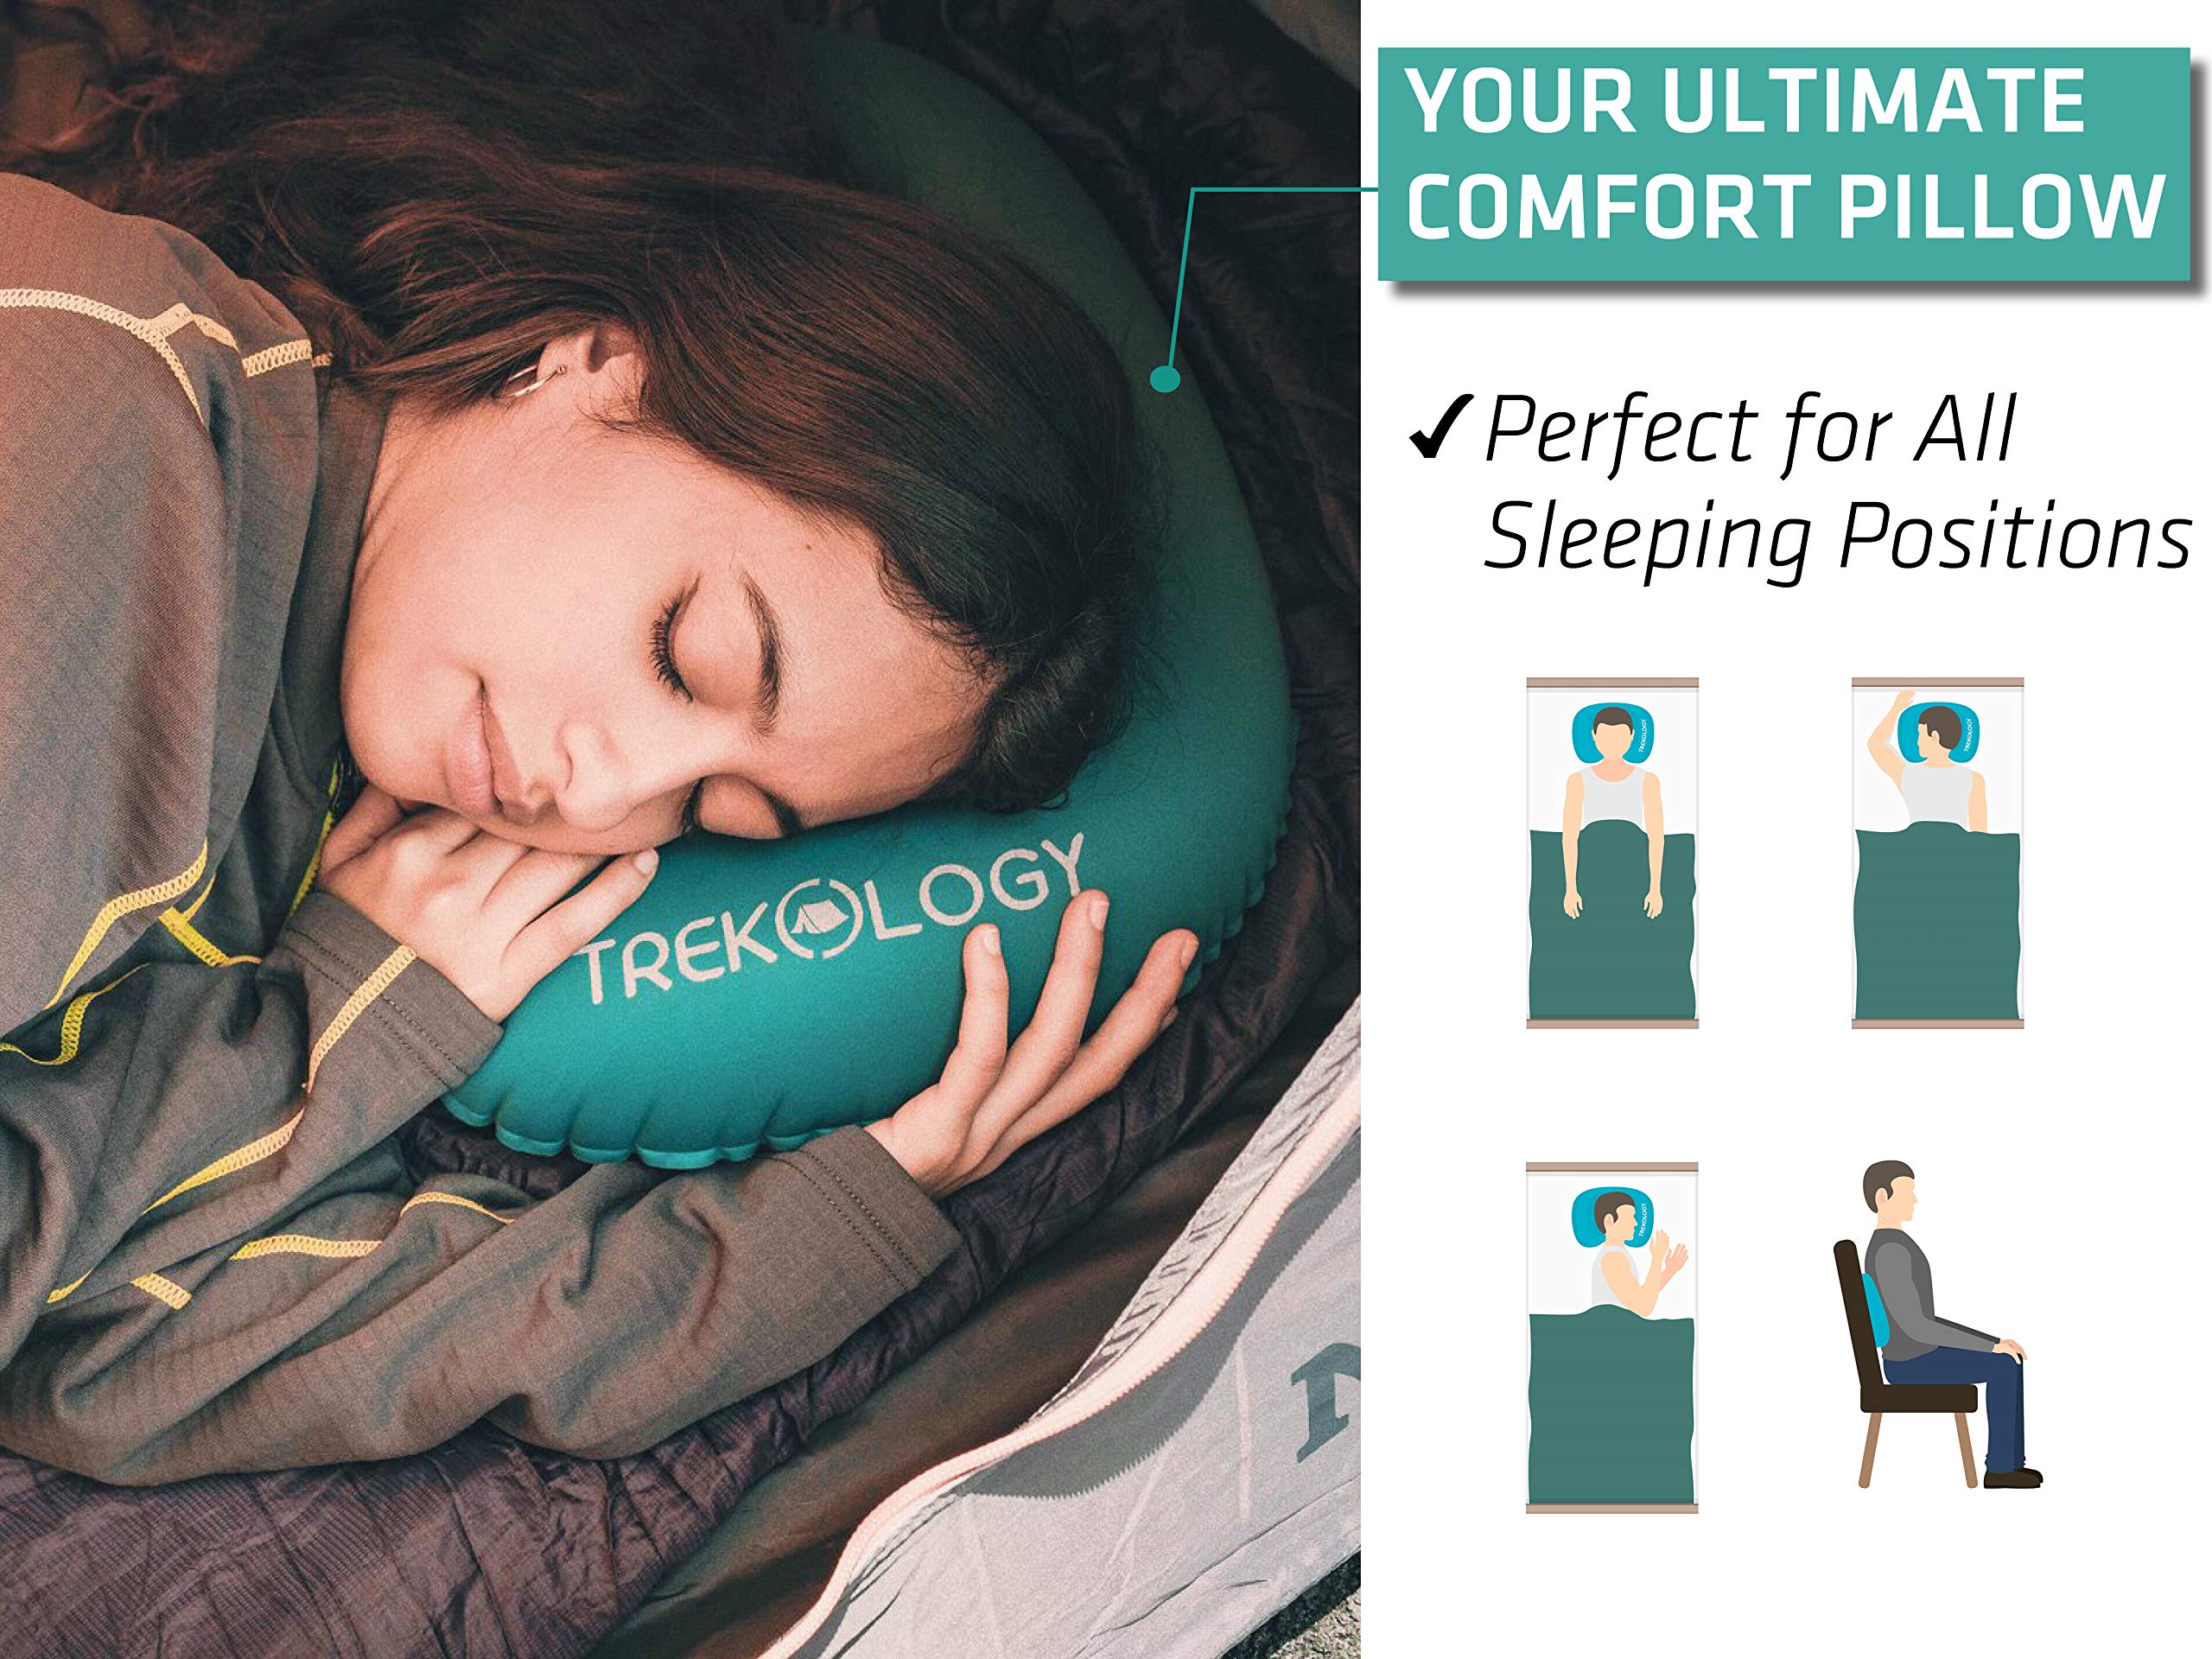 TREKOLOGY Aluft 1.0 Comfy Inflatable Camping & Backpacking Pillow - Perfect for Sleeping, Air Travel, Beach - Opticdeals